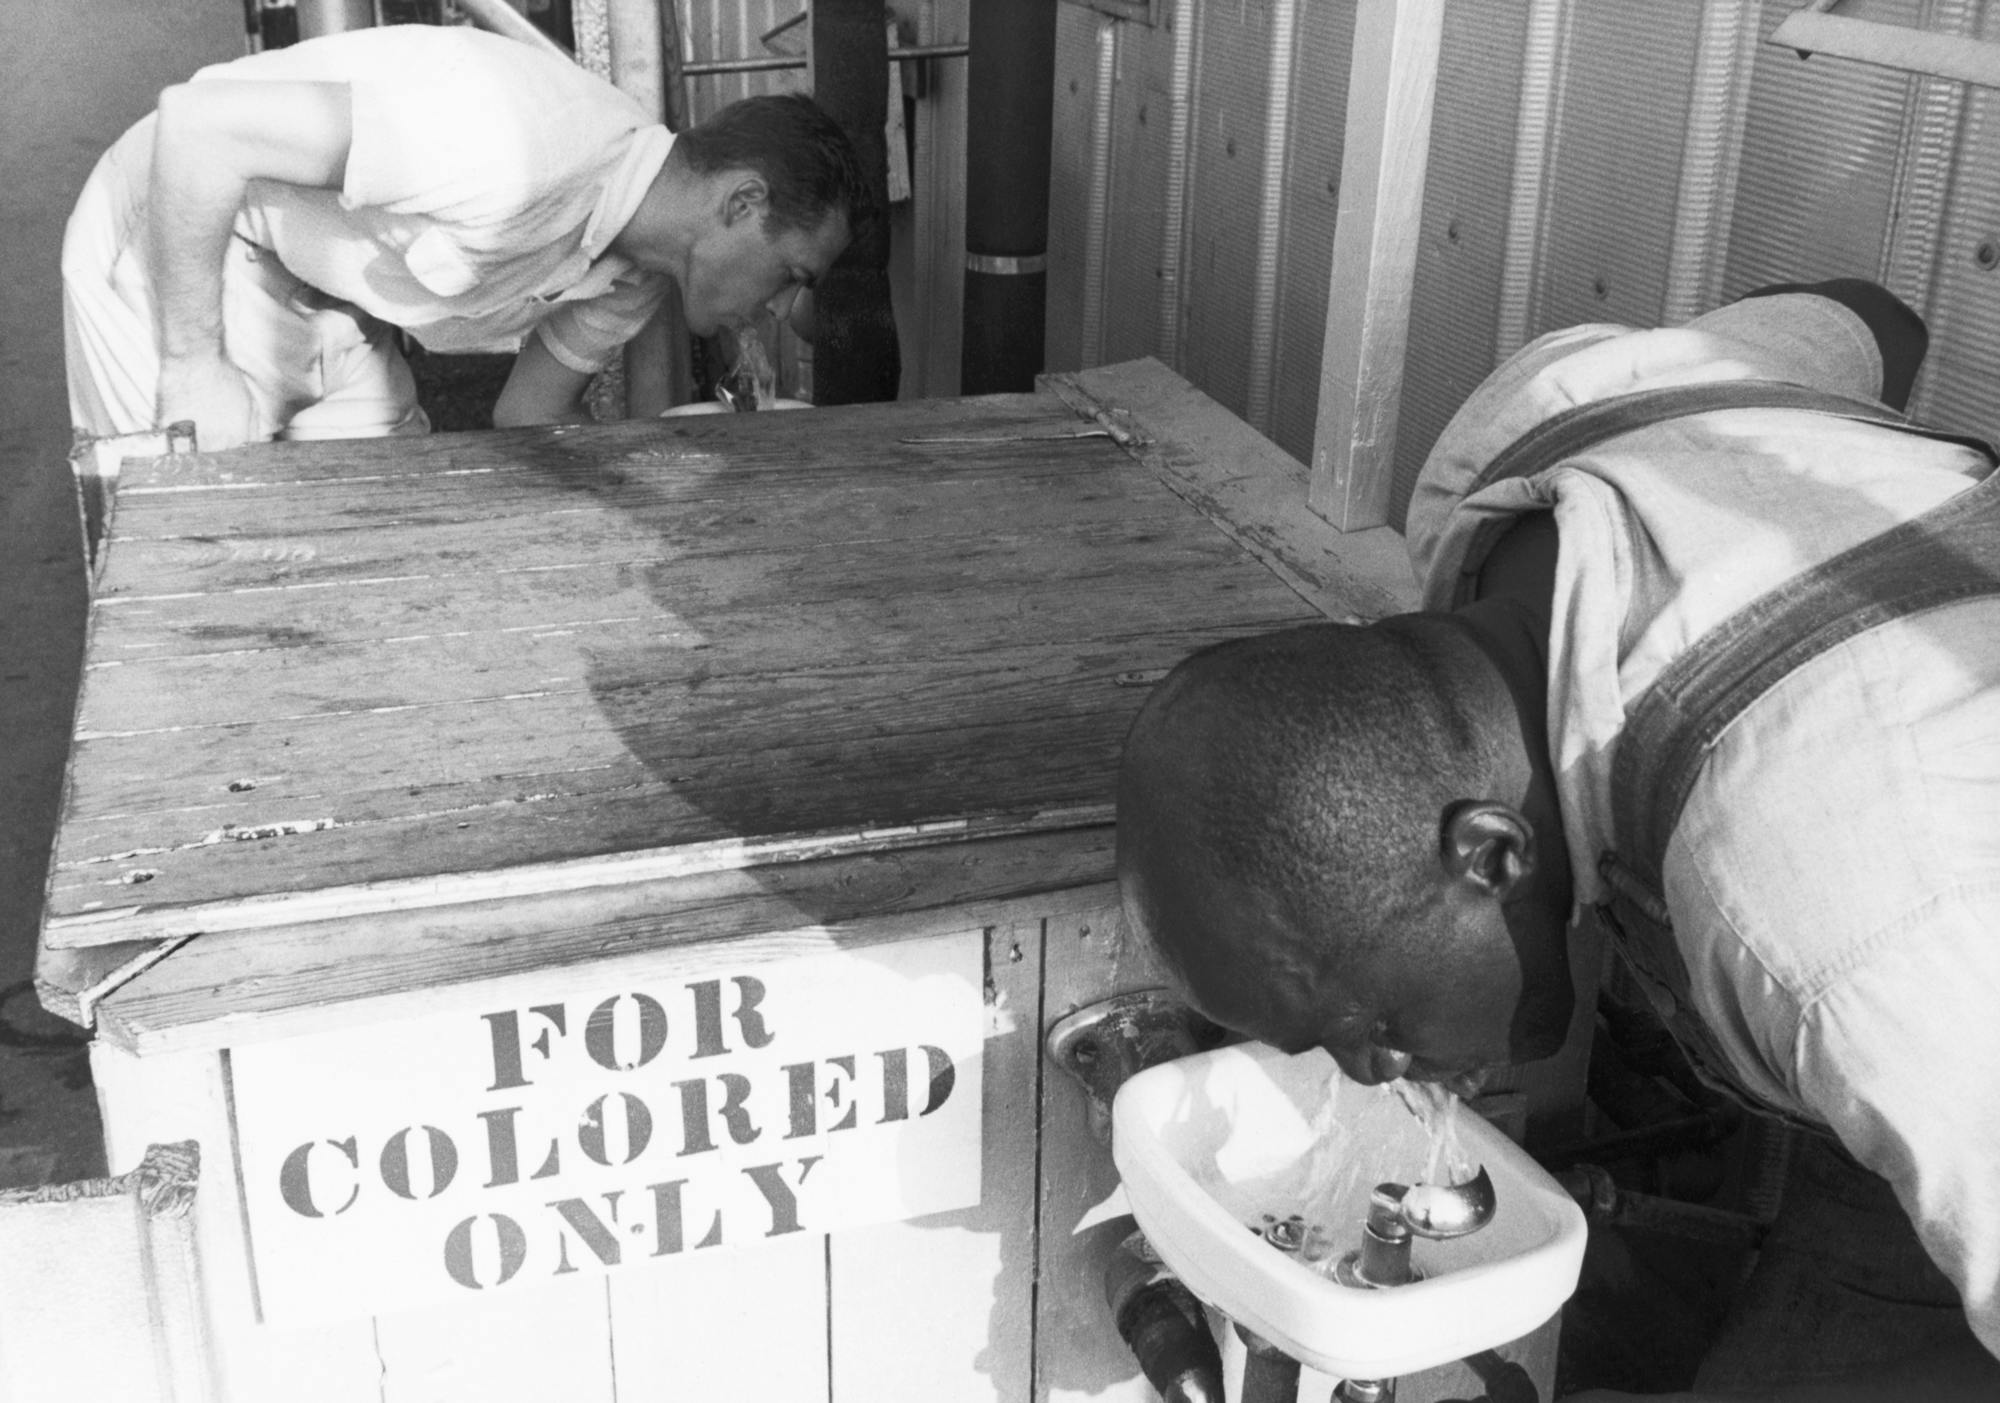 separate water fountains for black people still stand in the south – thinly veiled monuments to the long, strange, dehumanizing history of segregation